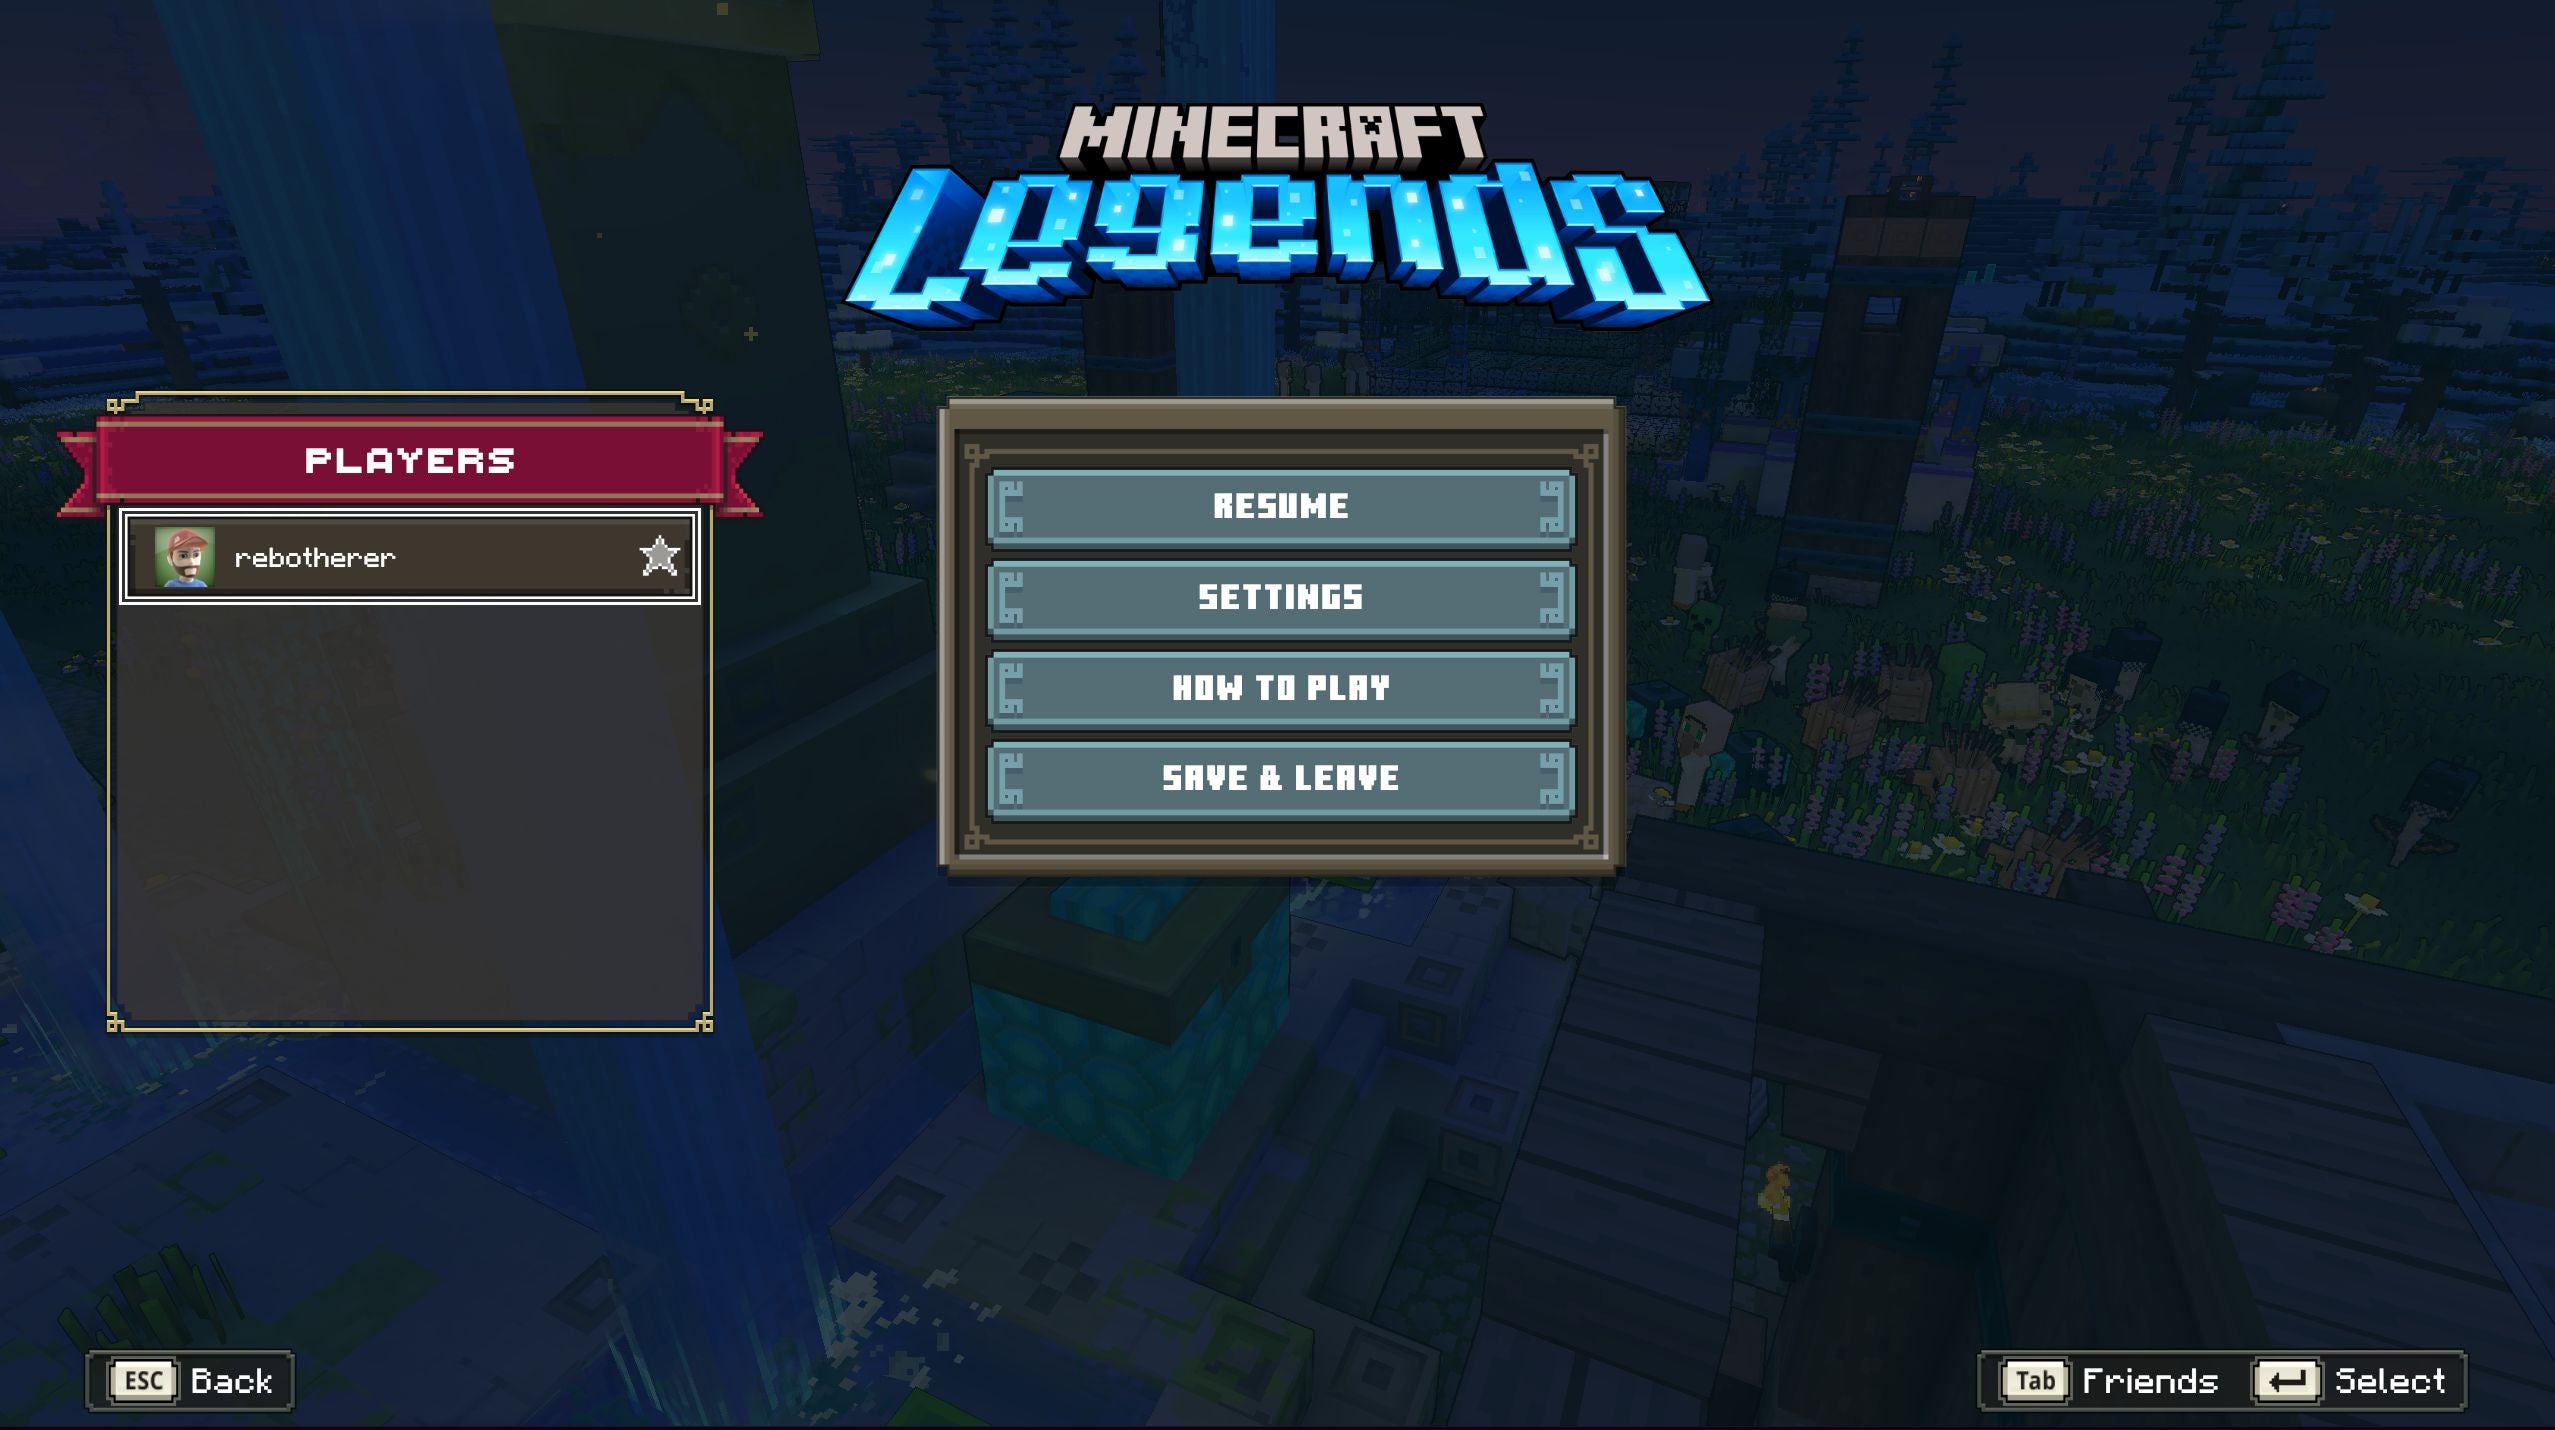 Minecraft Legends The Firsts locations and how to wake them up